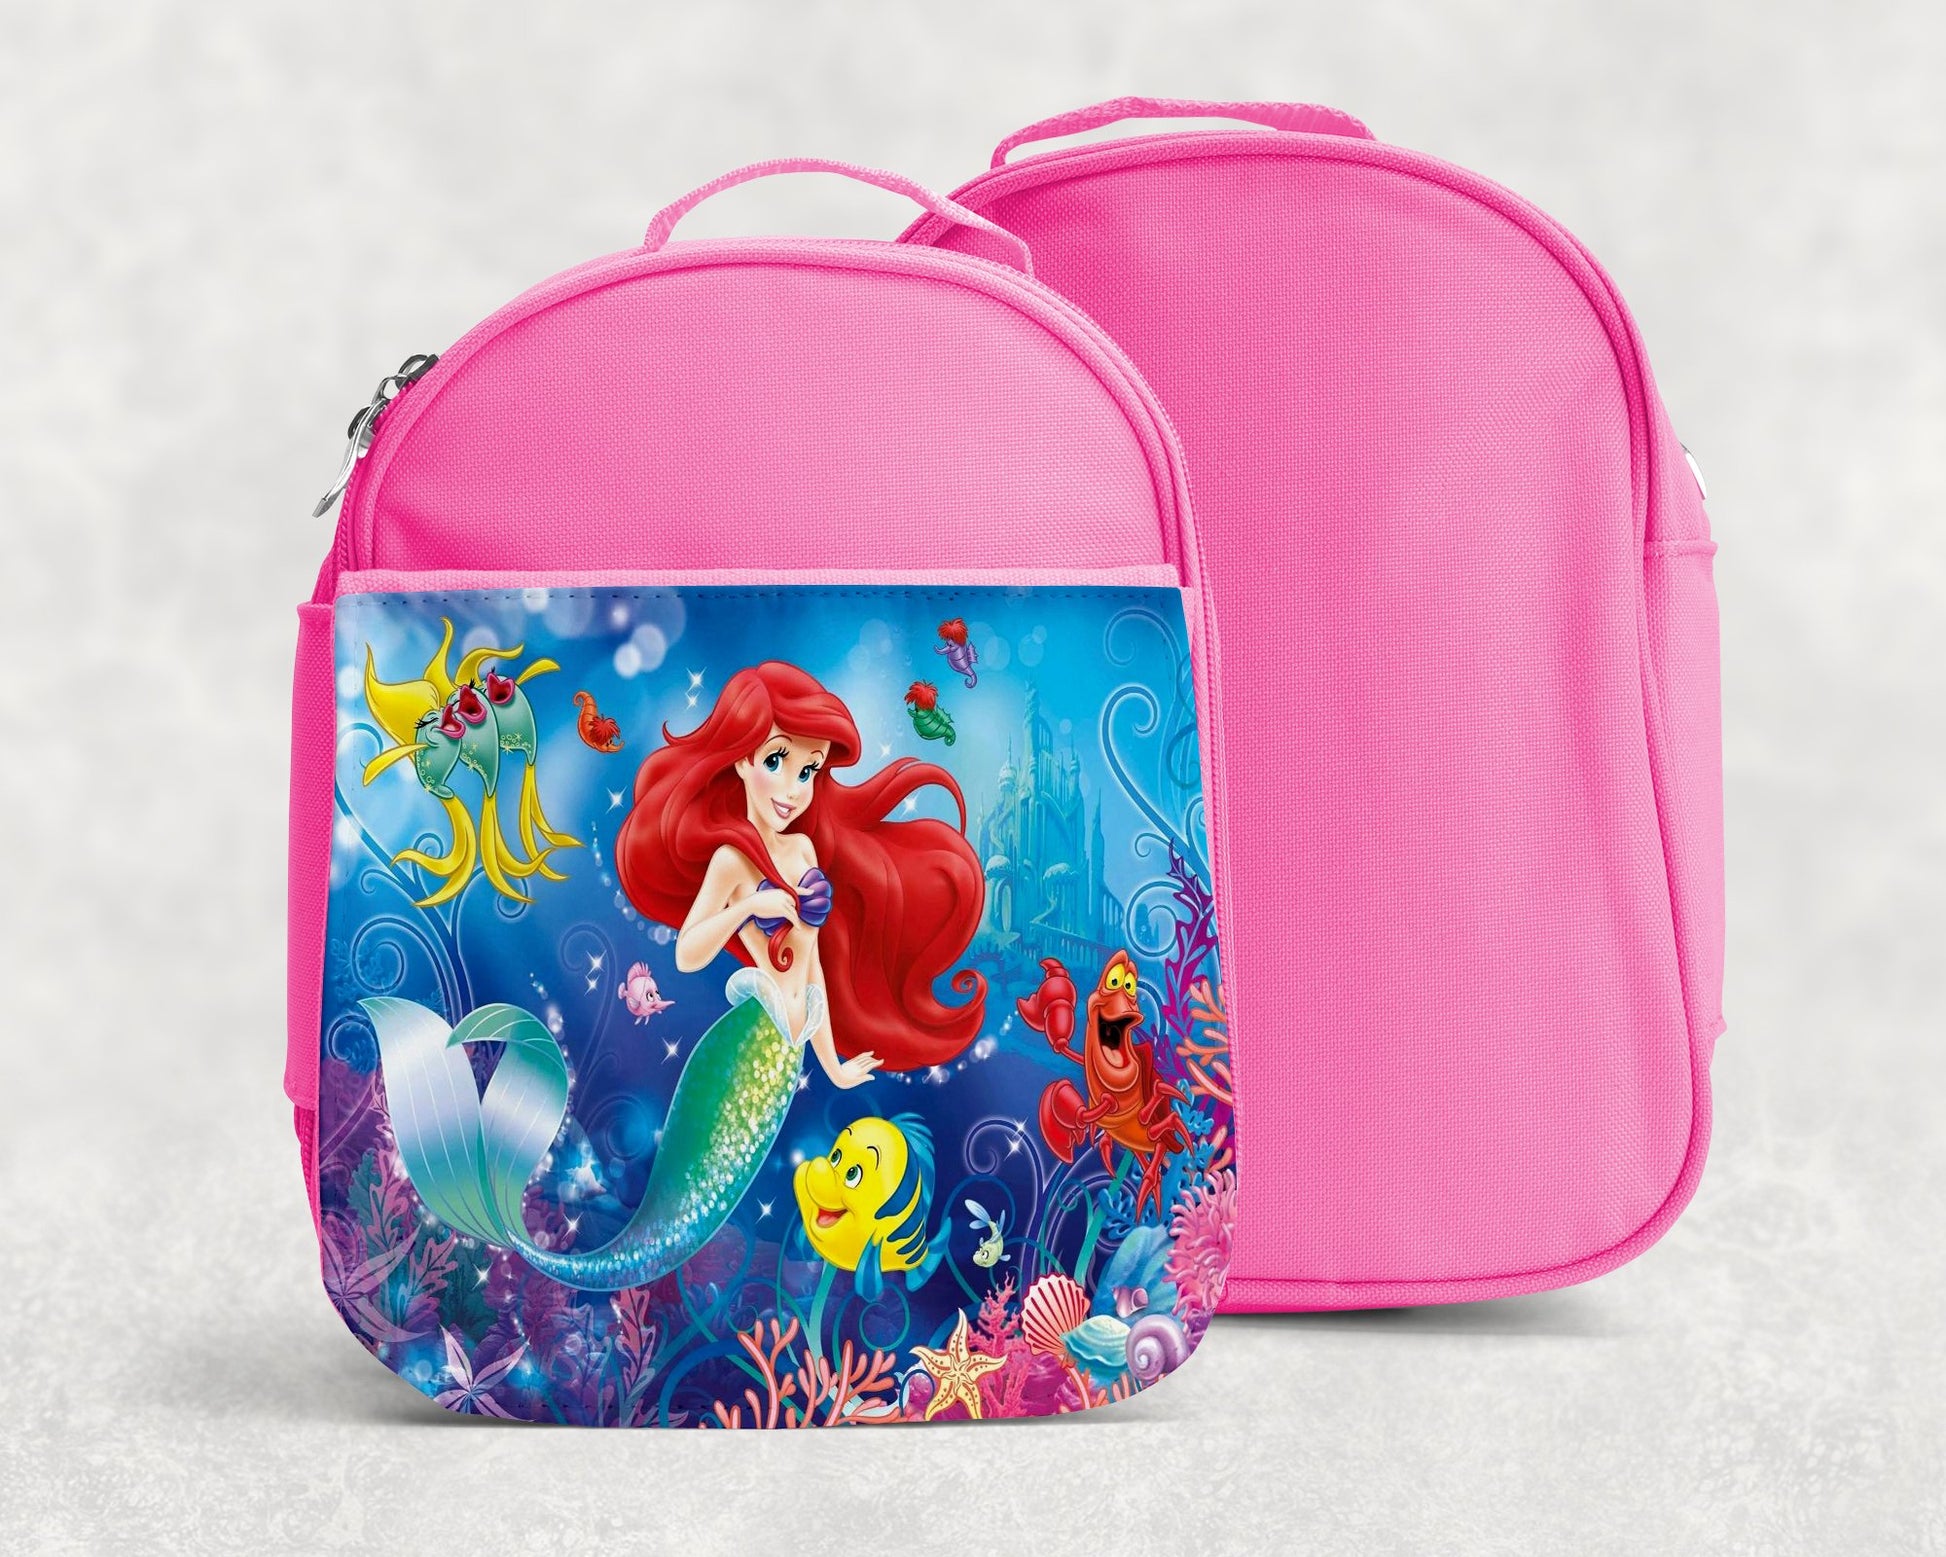 Ariel Lunch Tote